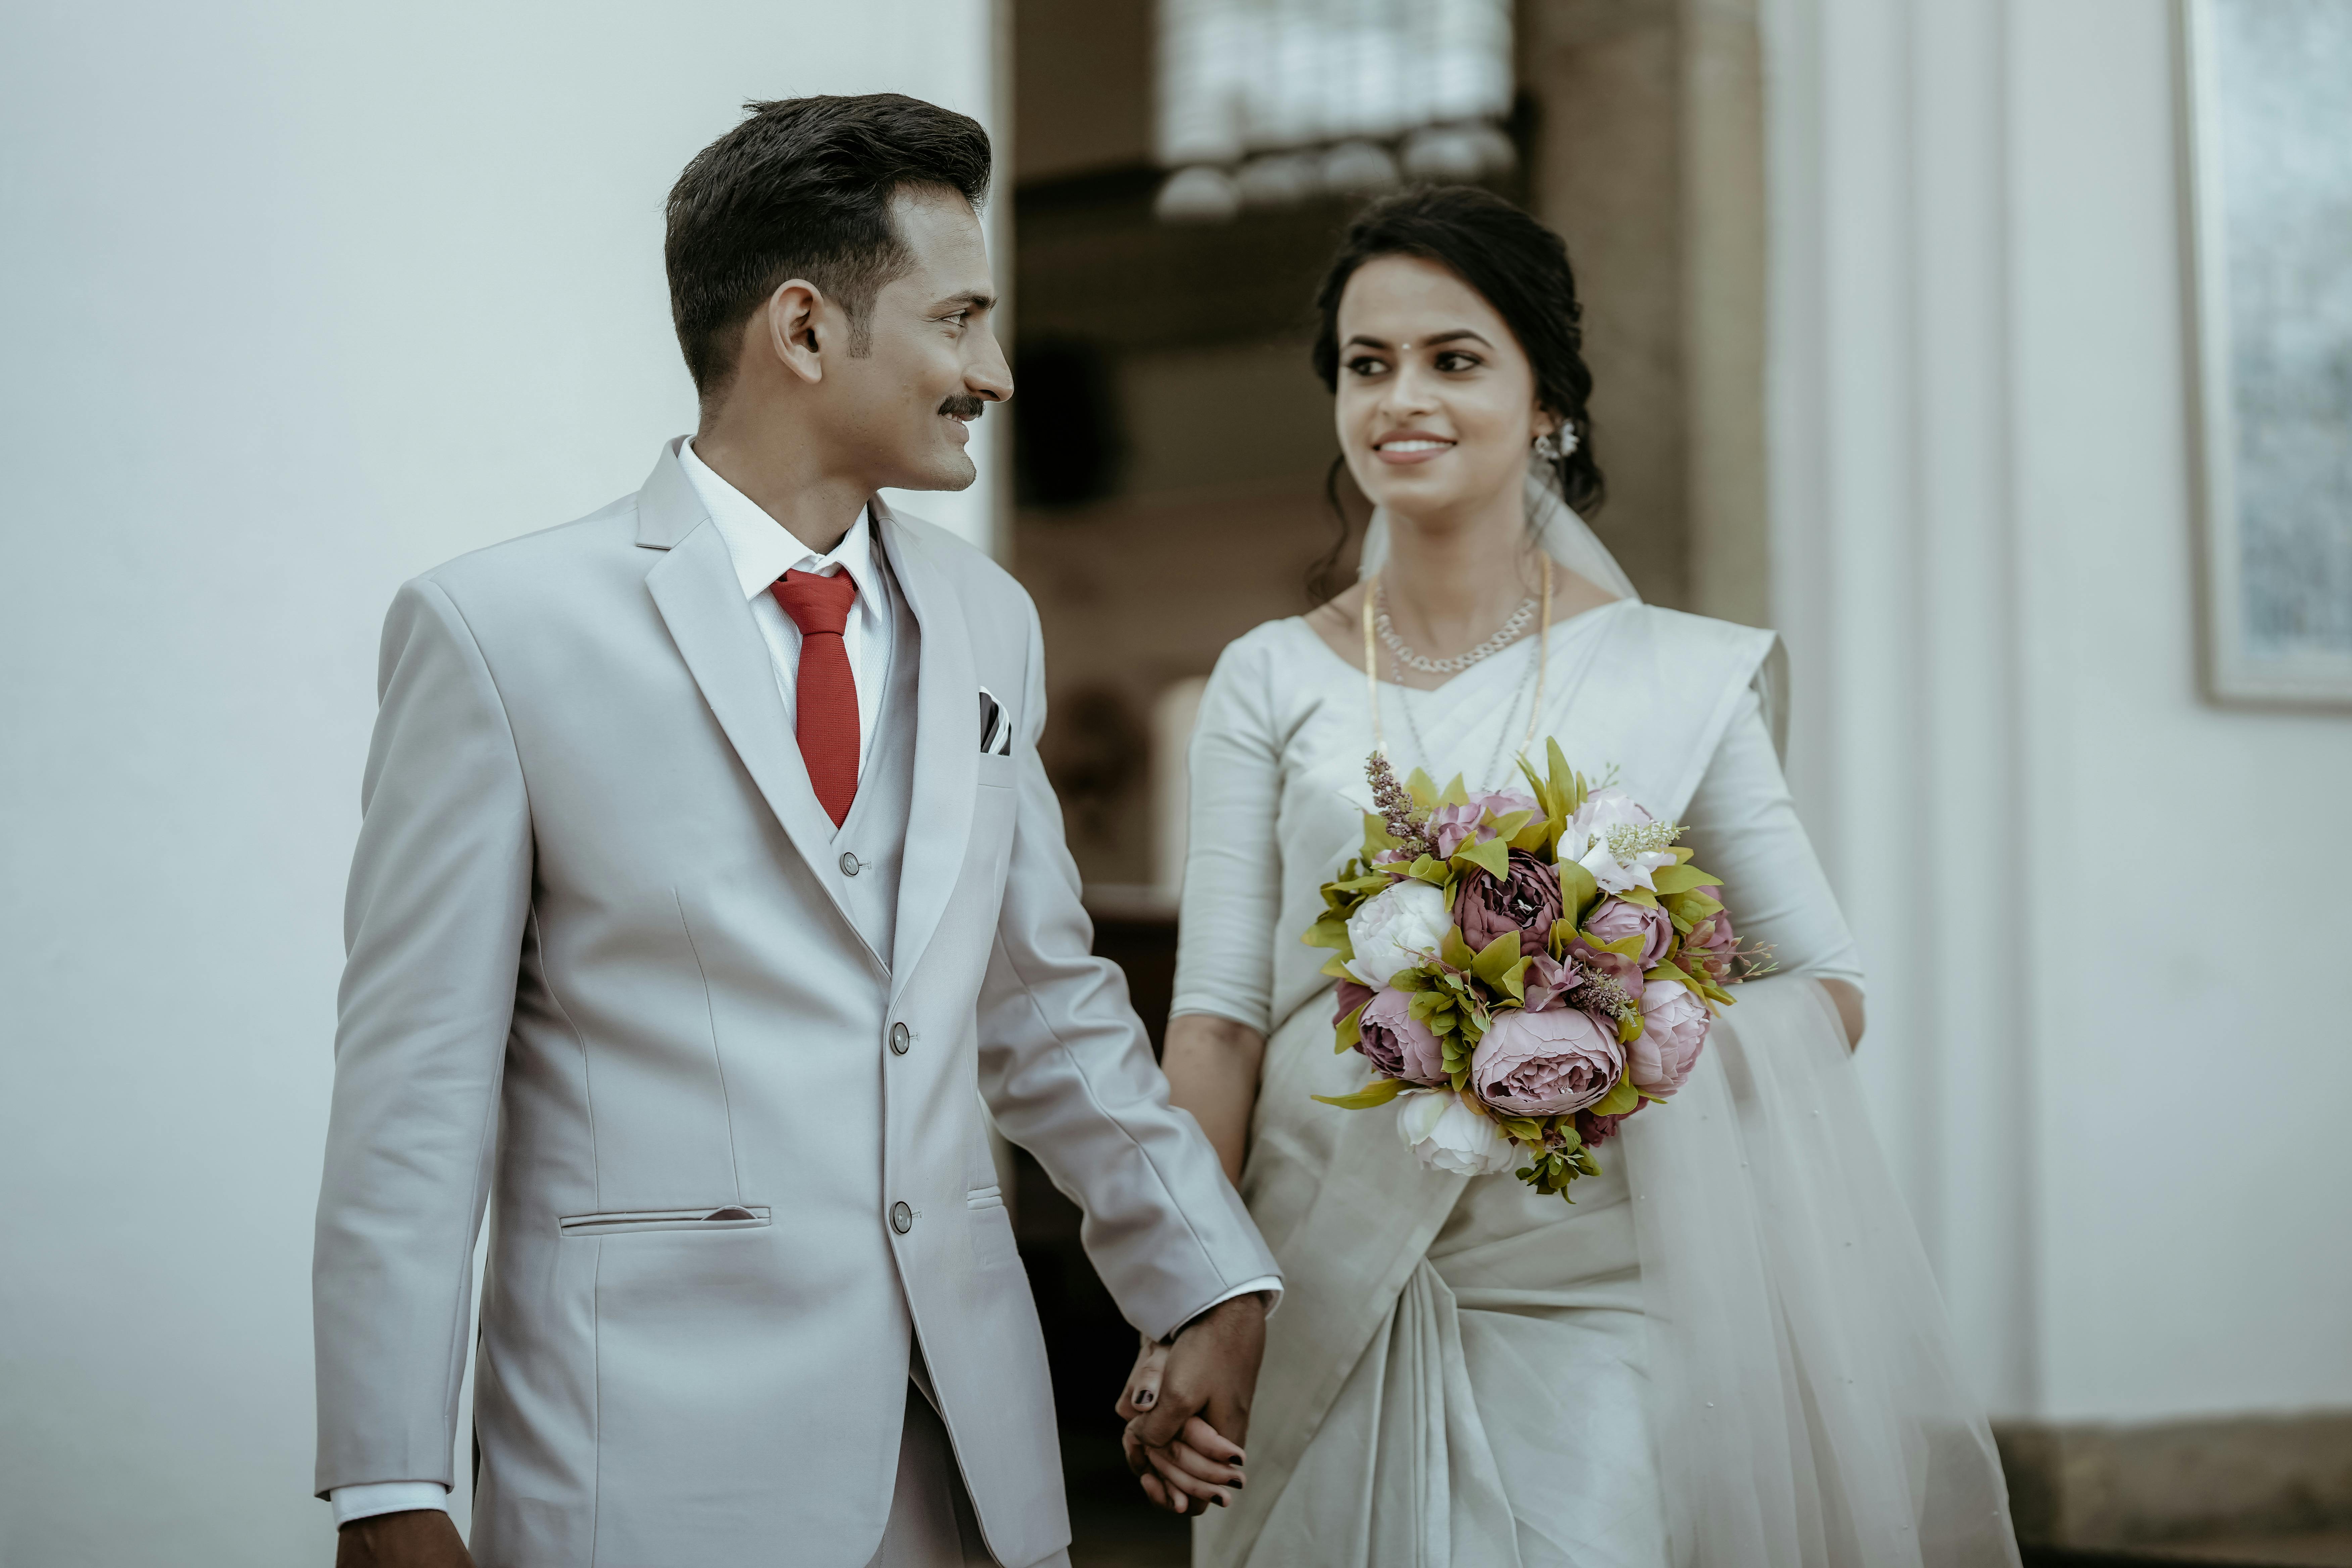 Why do Kerala Christian brides wear gowns for their wedding? - Quora